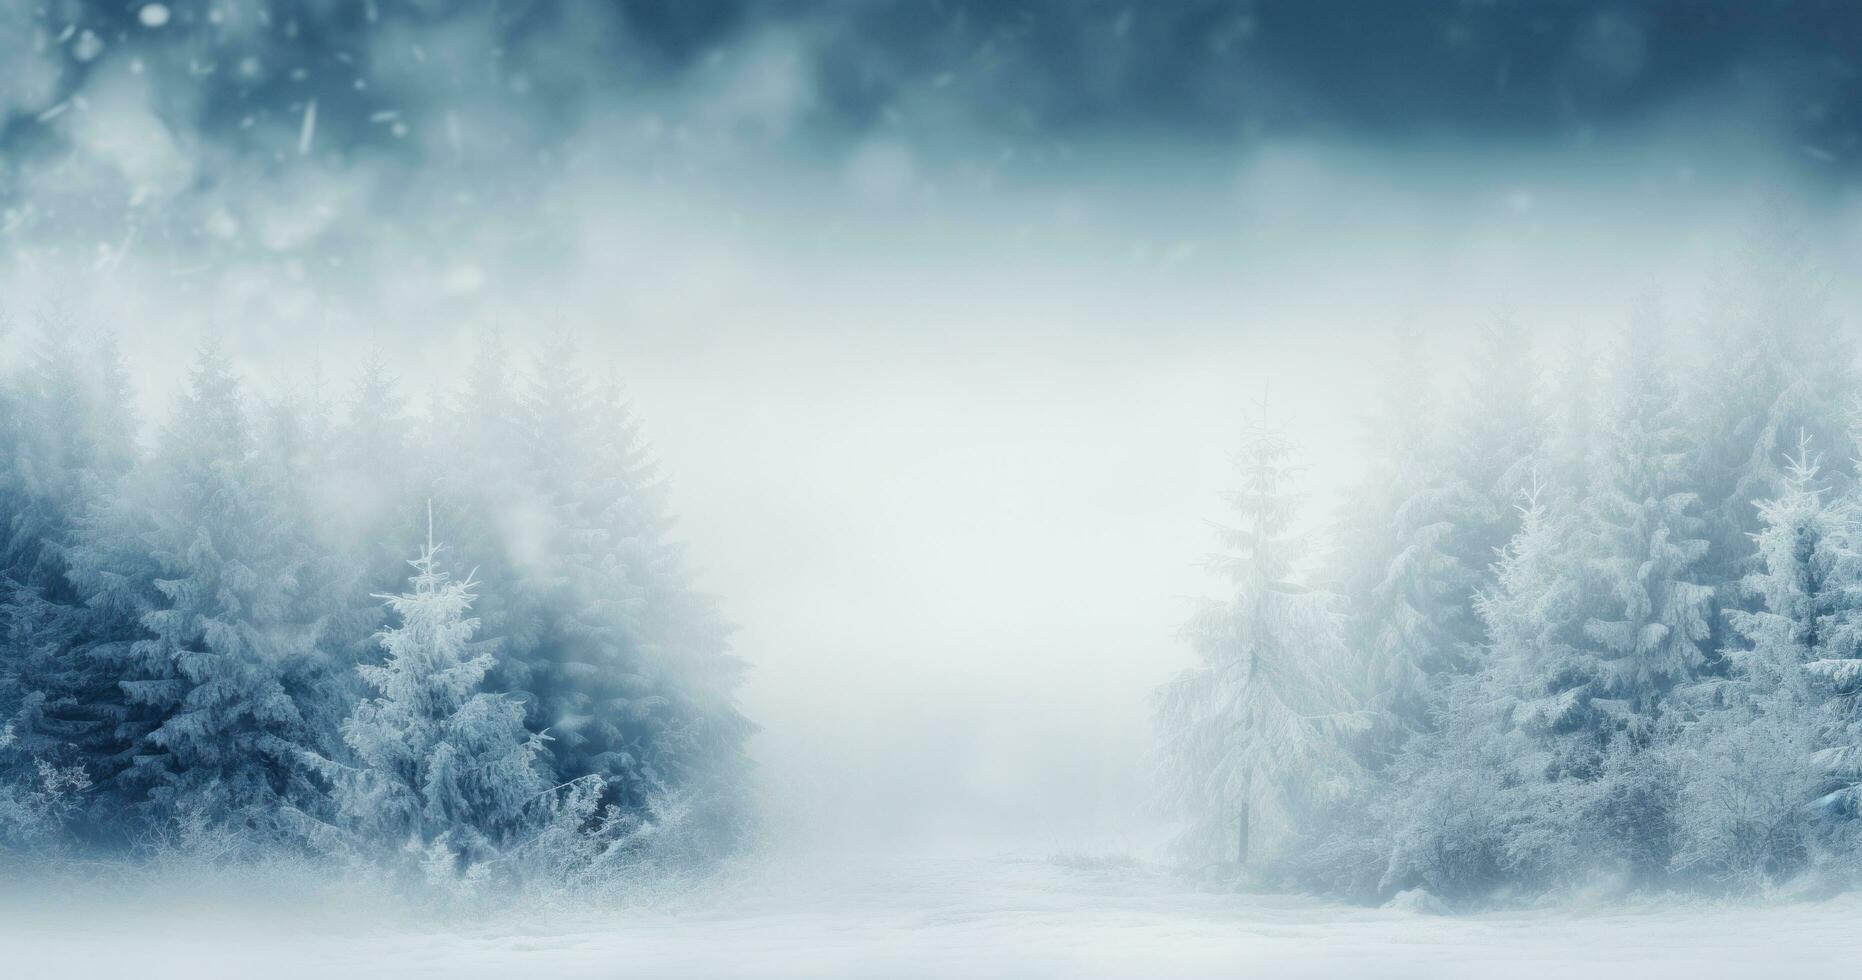 AI generated a white background with snowy trees and branches, photo